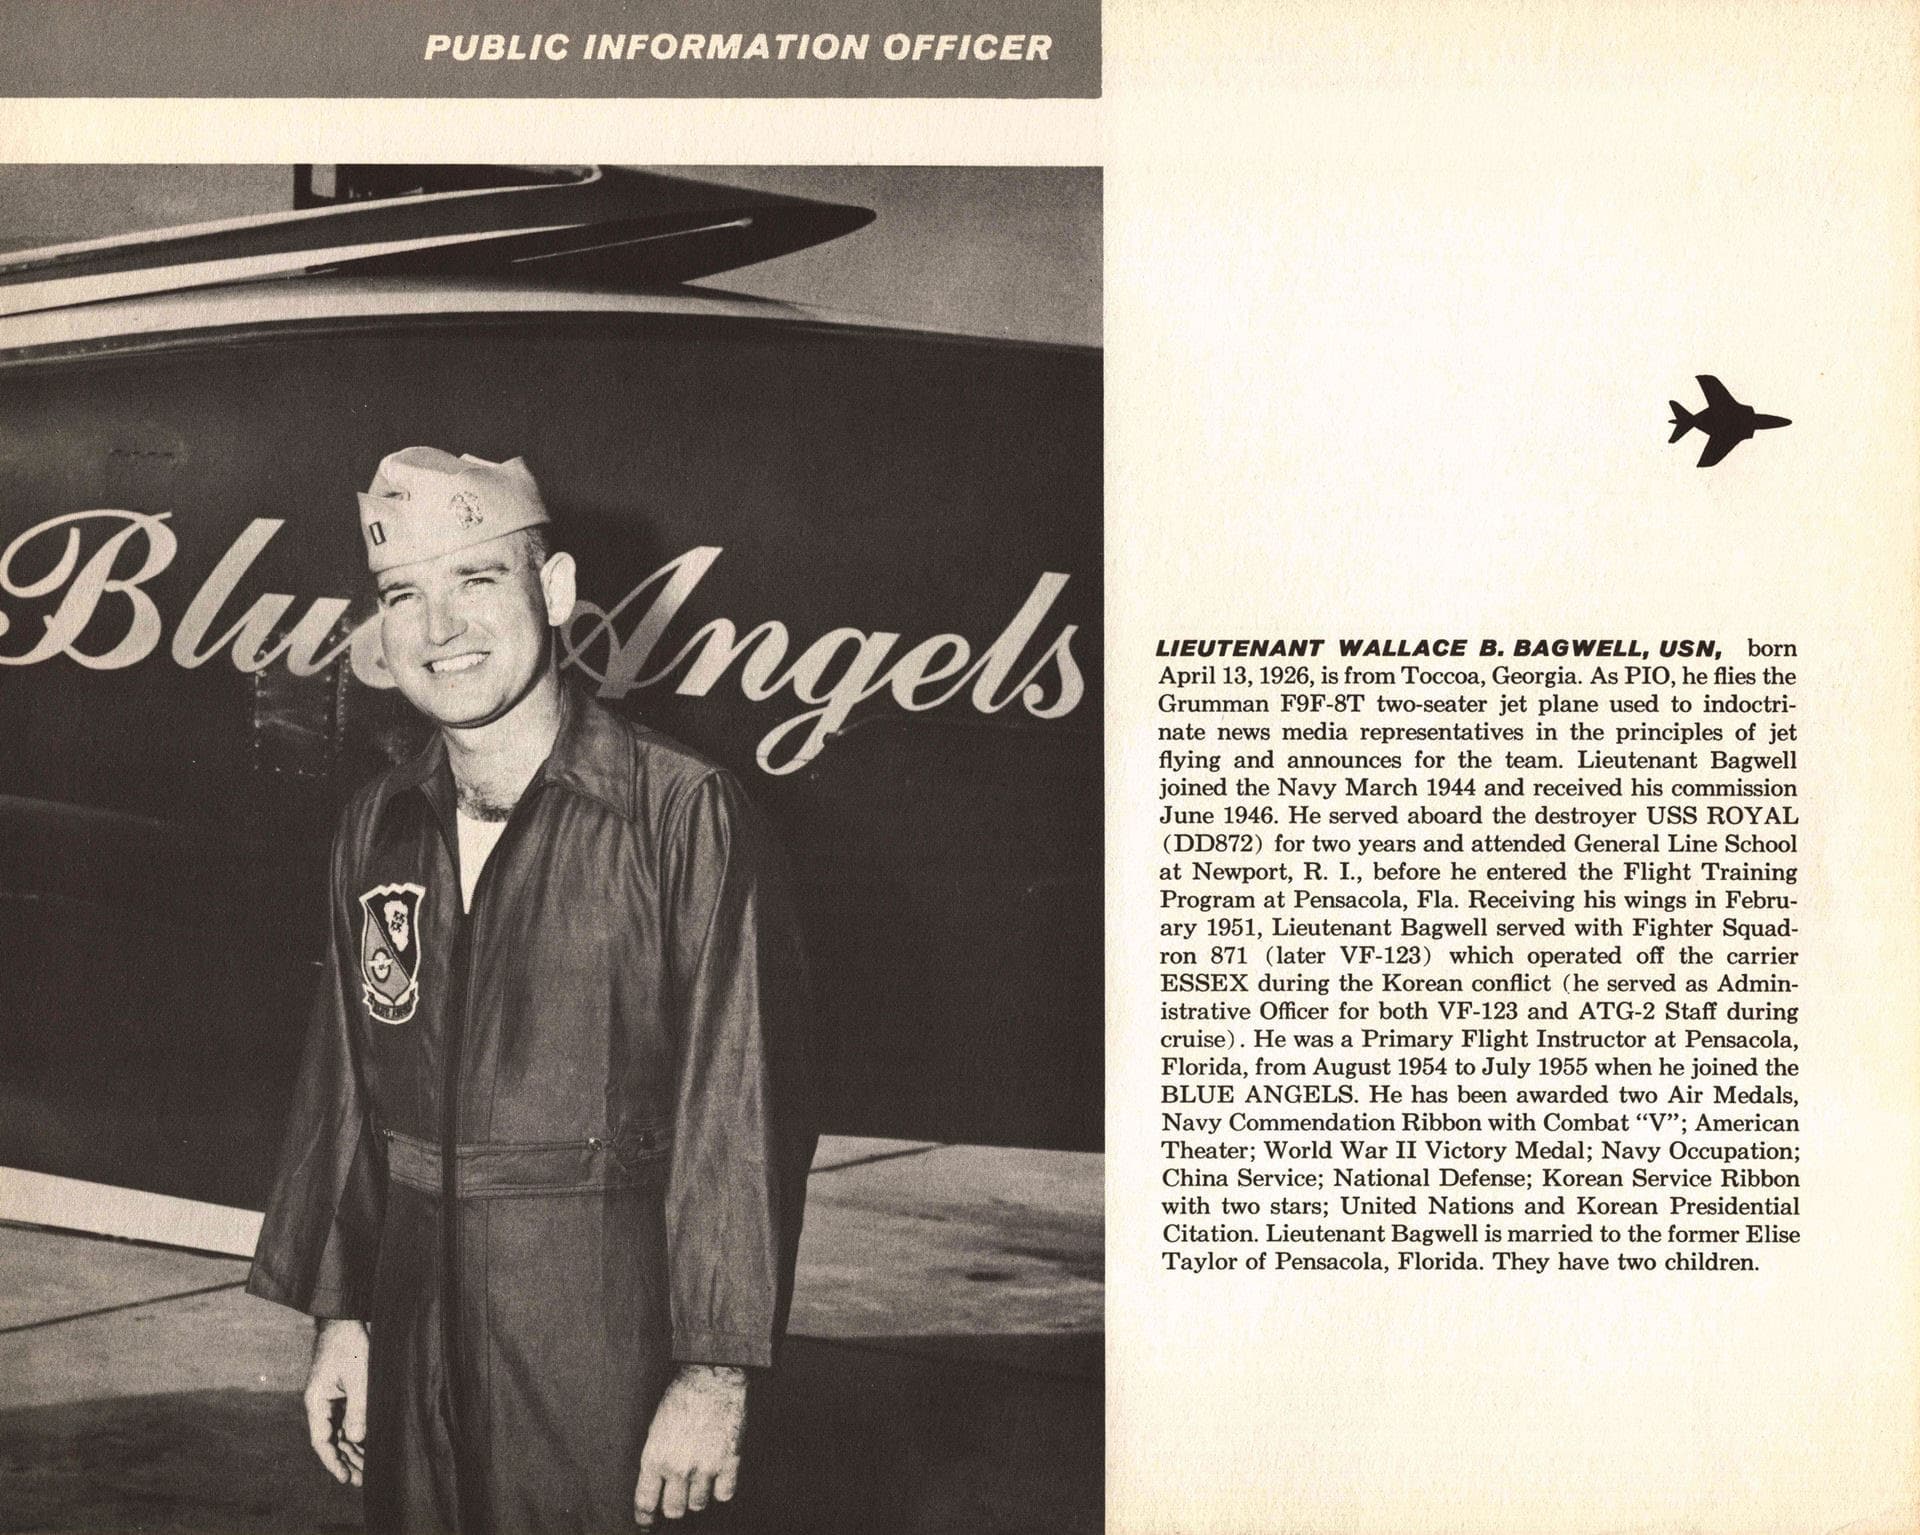 1957 Blue Angels Yearbook page featuring Lt. Bruce Bagwell